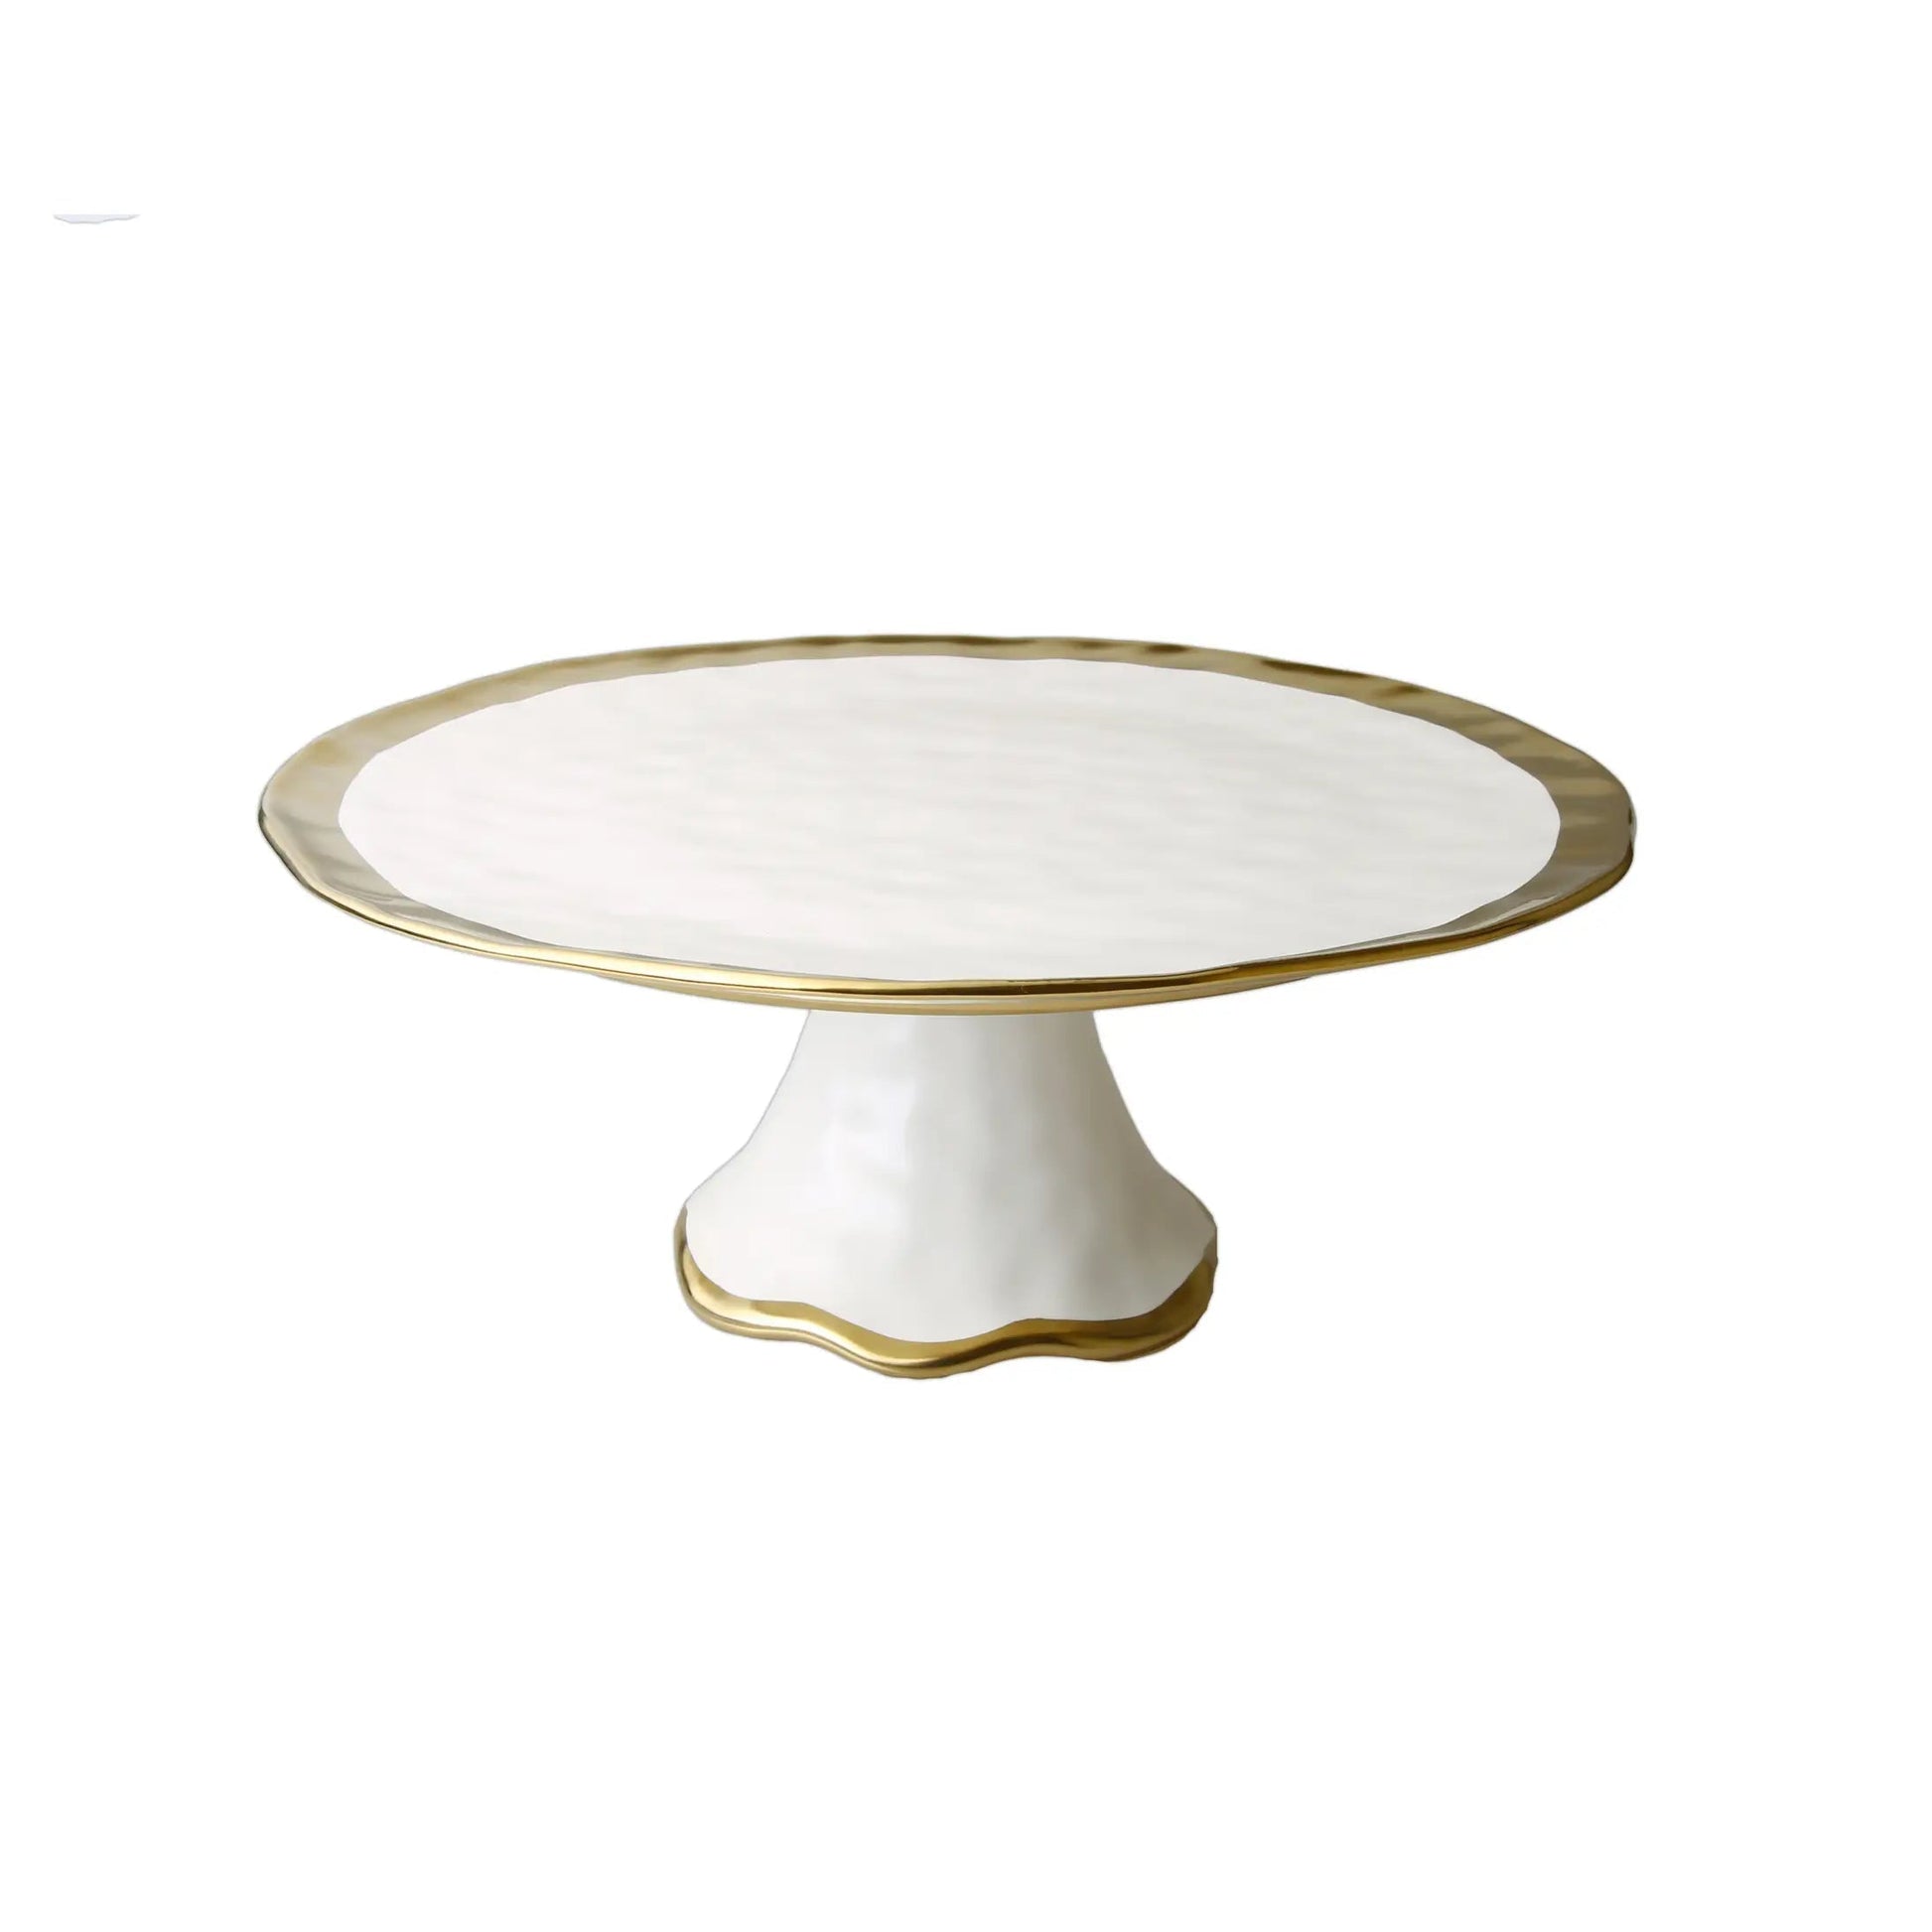 Porcelain White Cake Stand with Gold Border Cake Stands High Class Touch - Home Decor 